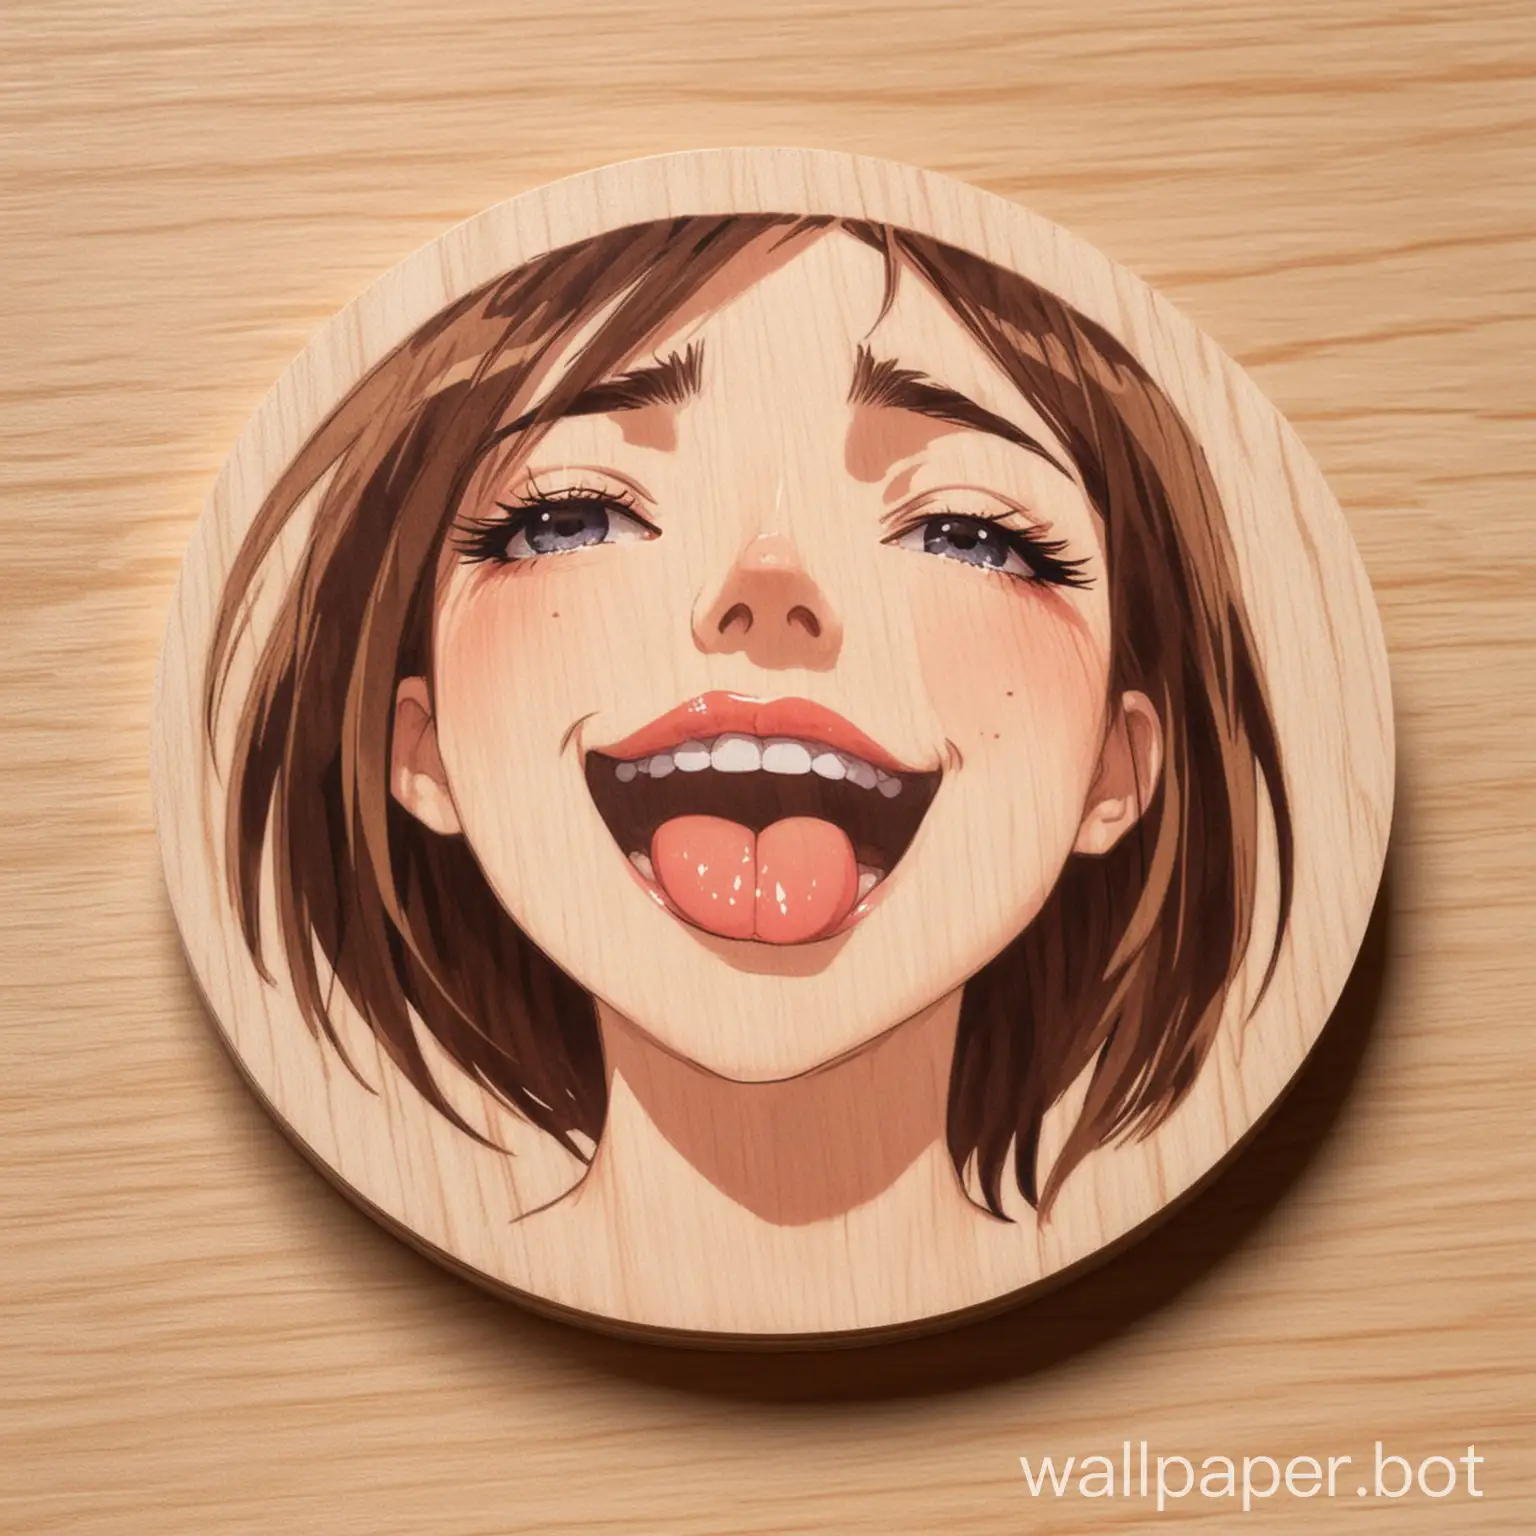 Sweaty-Anime-Woman-Blushing-and-Shyly-Sticking-Out-Tongue-on-Round-NSFW-Coaster